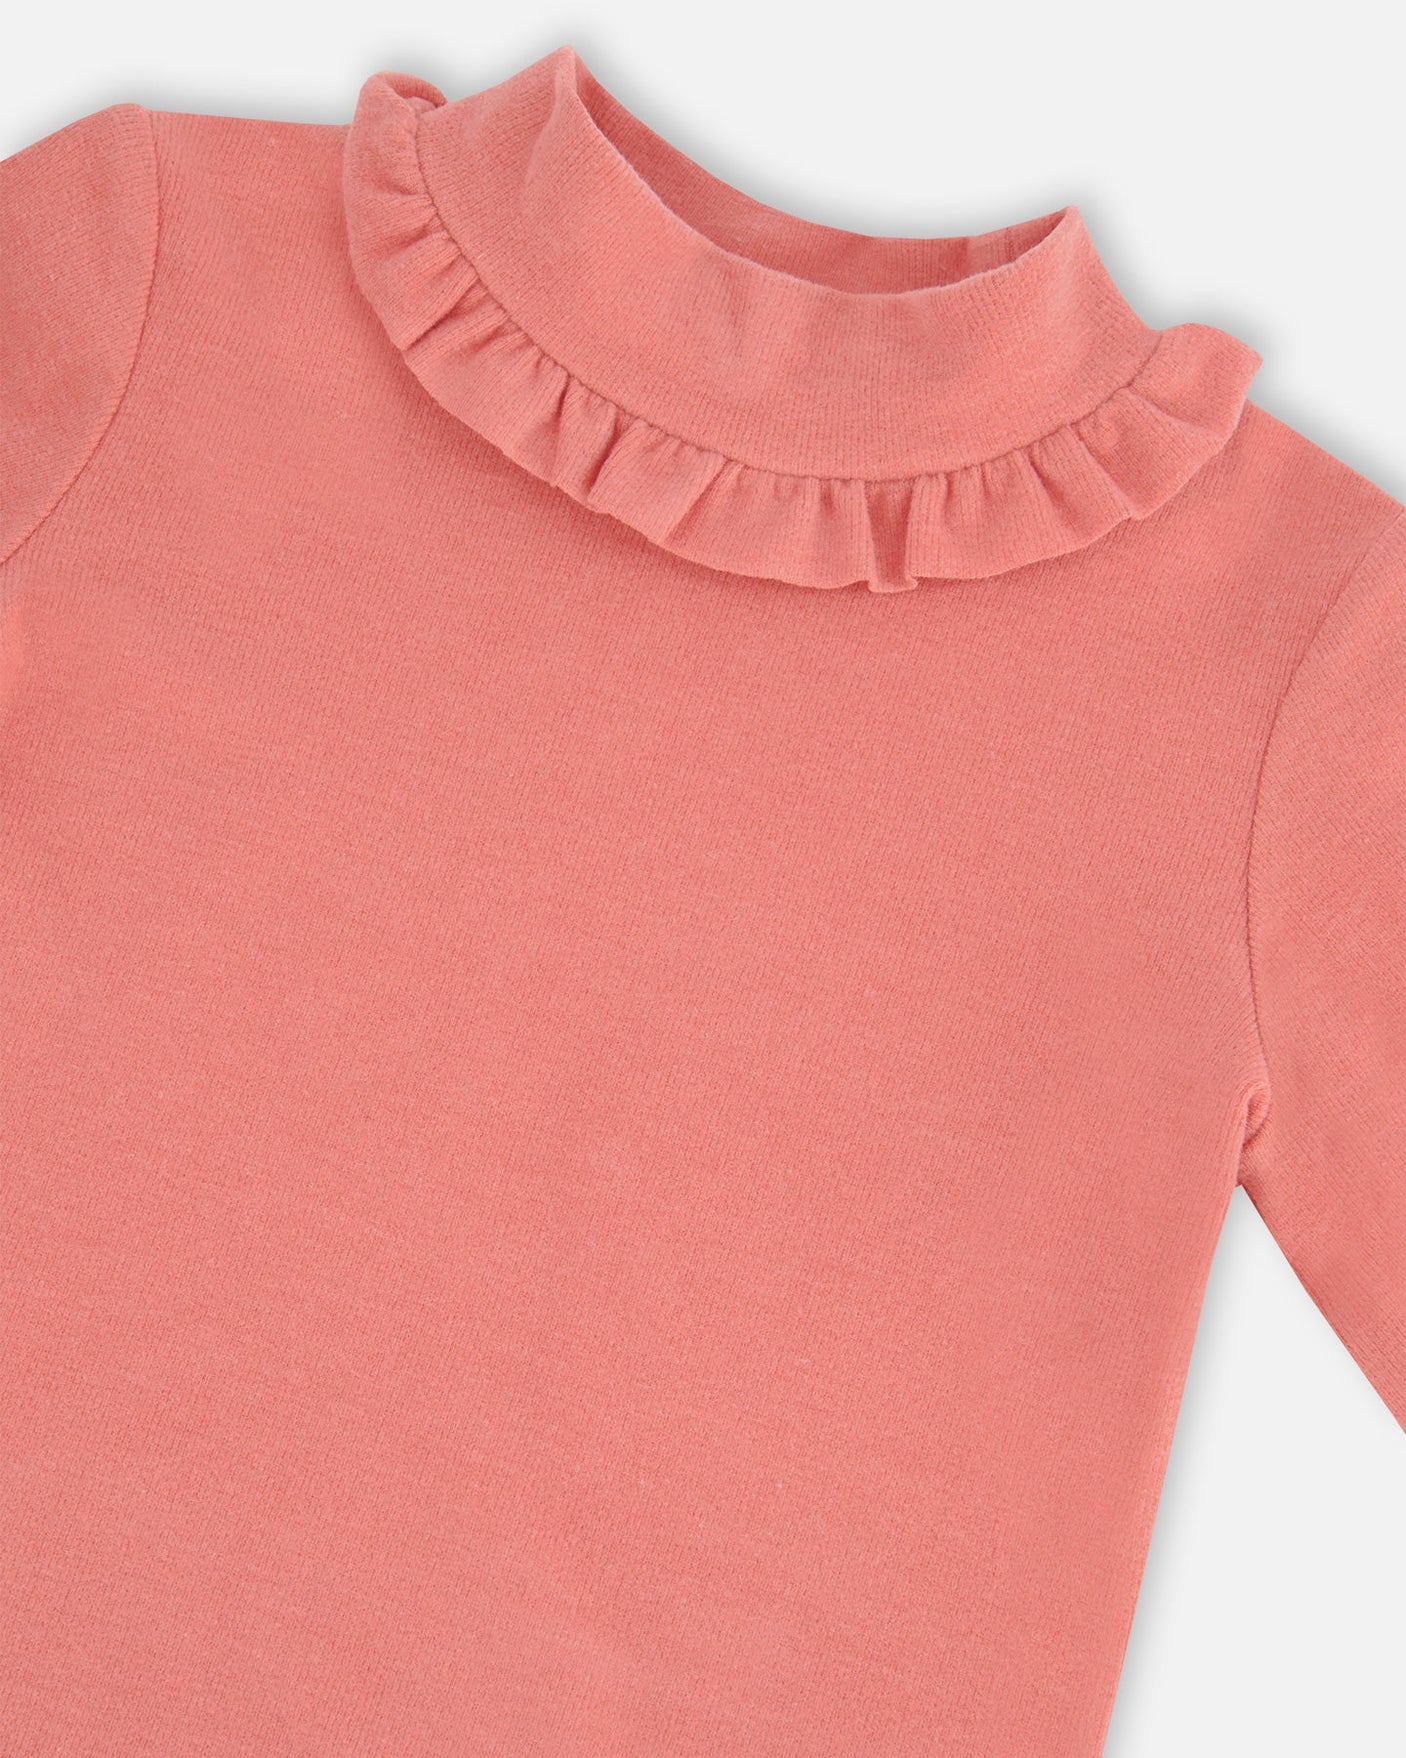 Super Soft Brushed Rib Mock Neck Top With Frills Salmon Pink-3